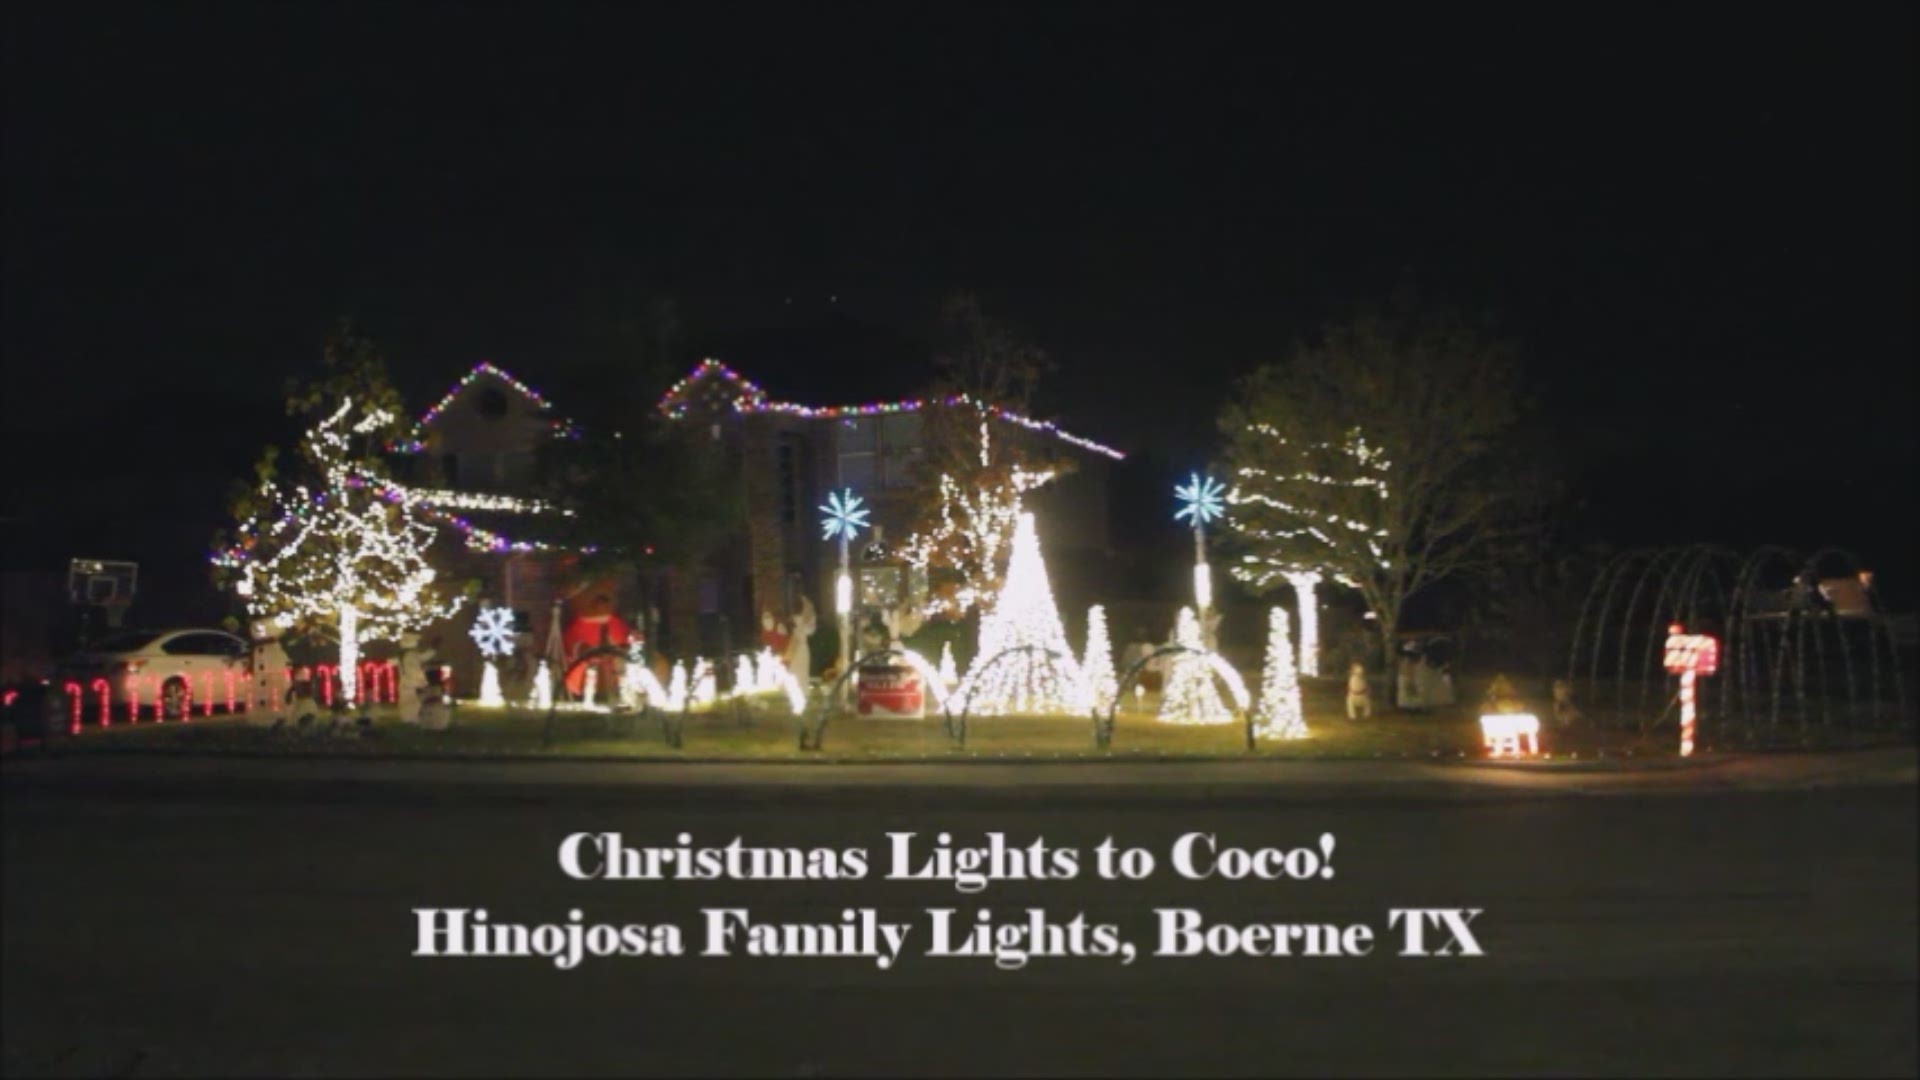 Un Poco Loco song from Coco featured in holiday lights show in Boerne, Tx.